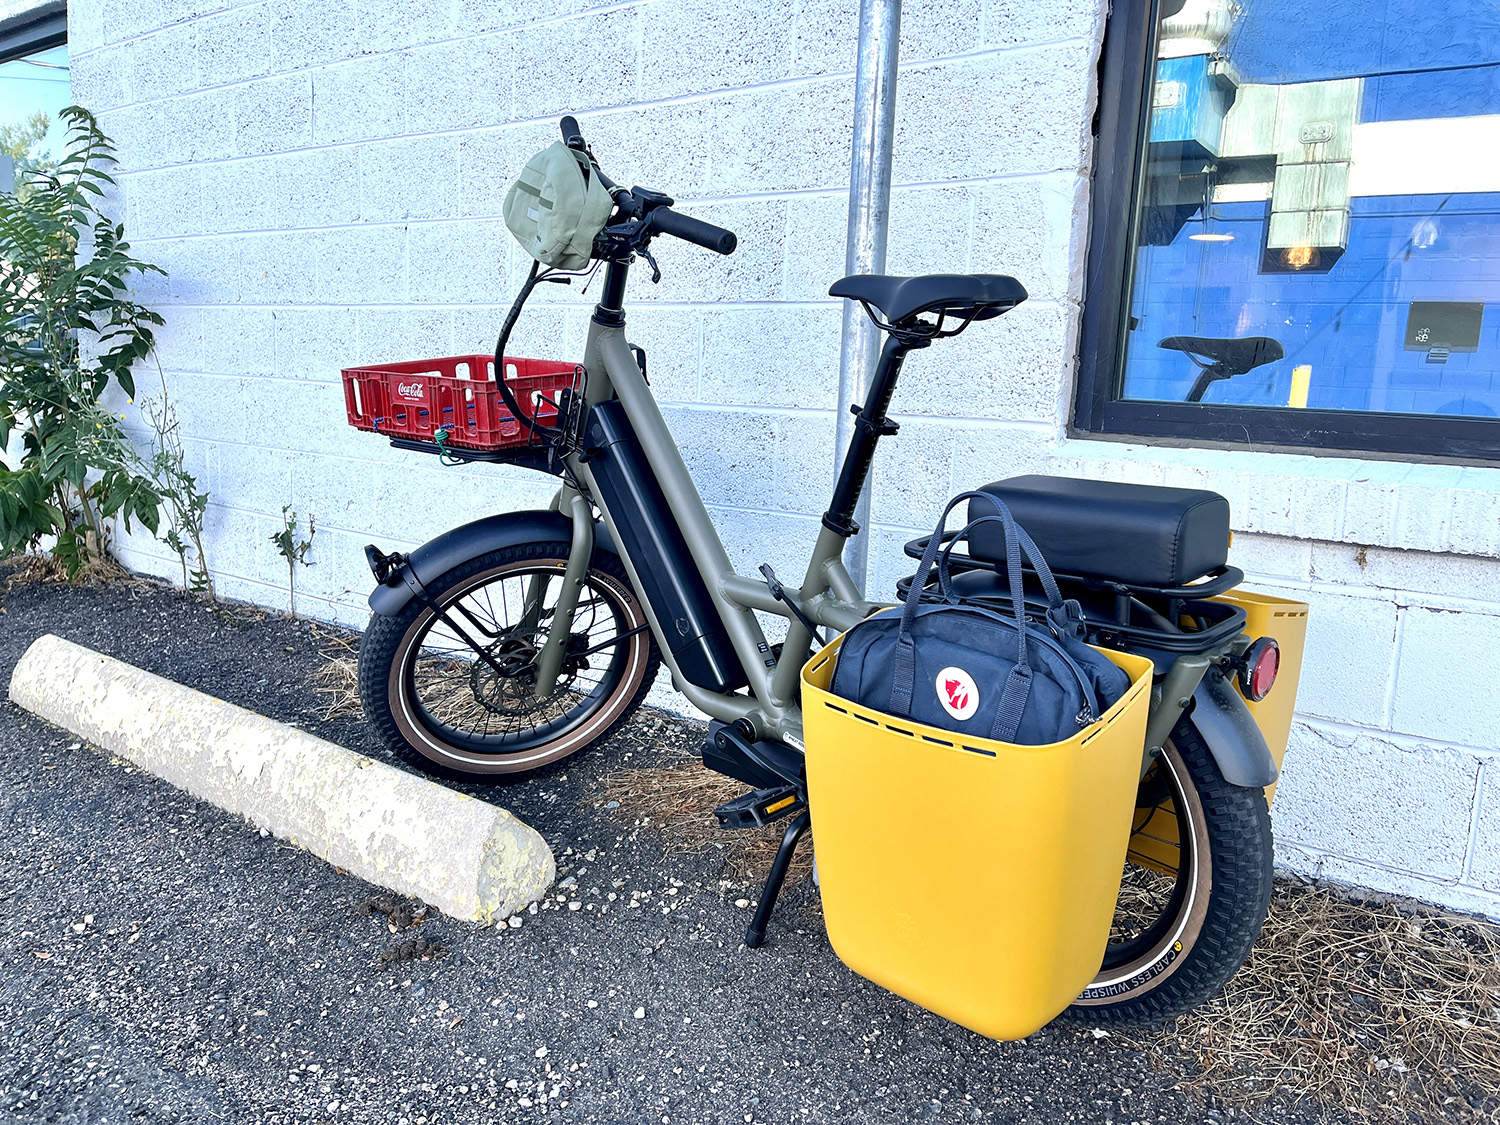 Globe Haul ST bike with yellow panniers and a red rack on the front